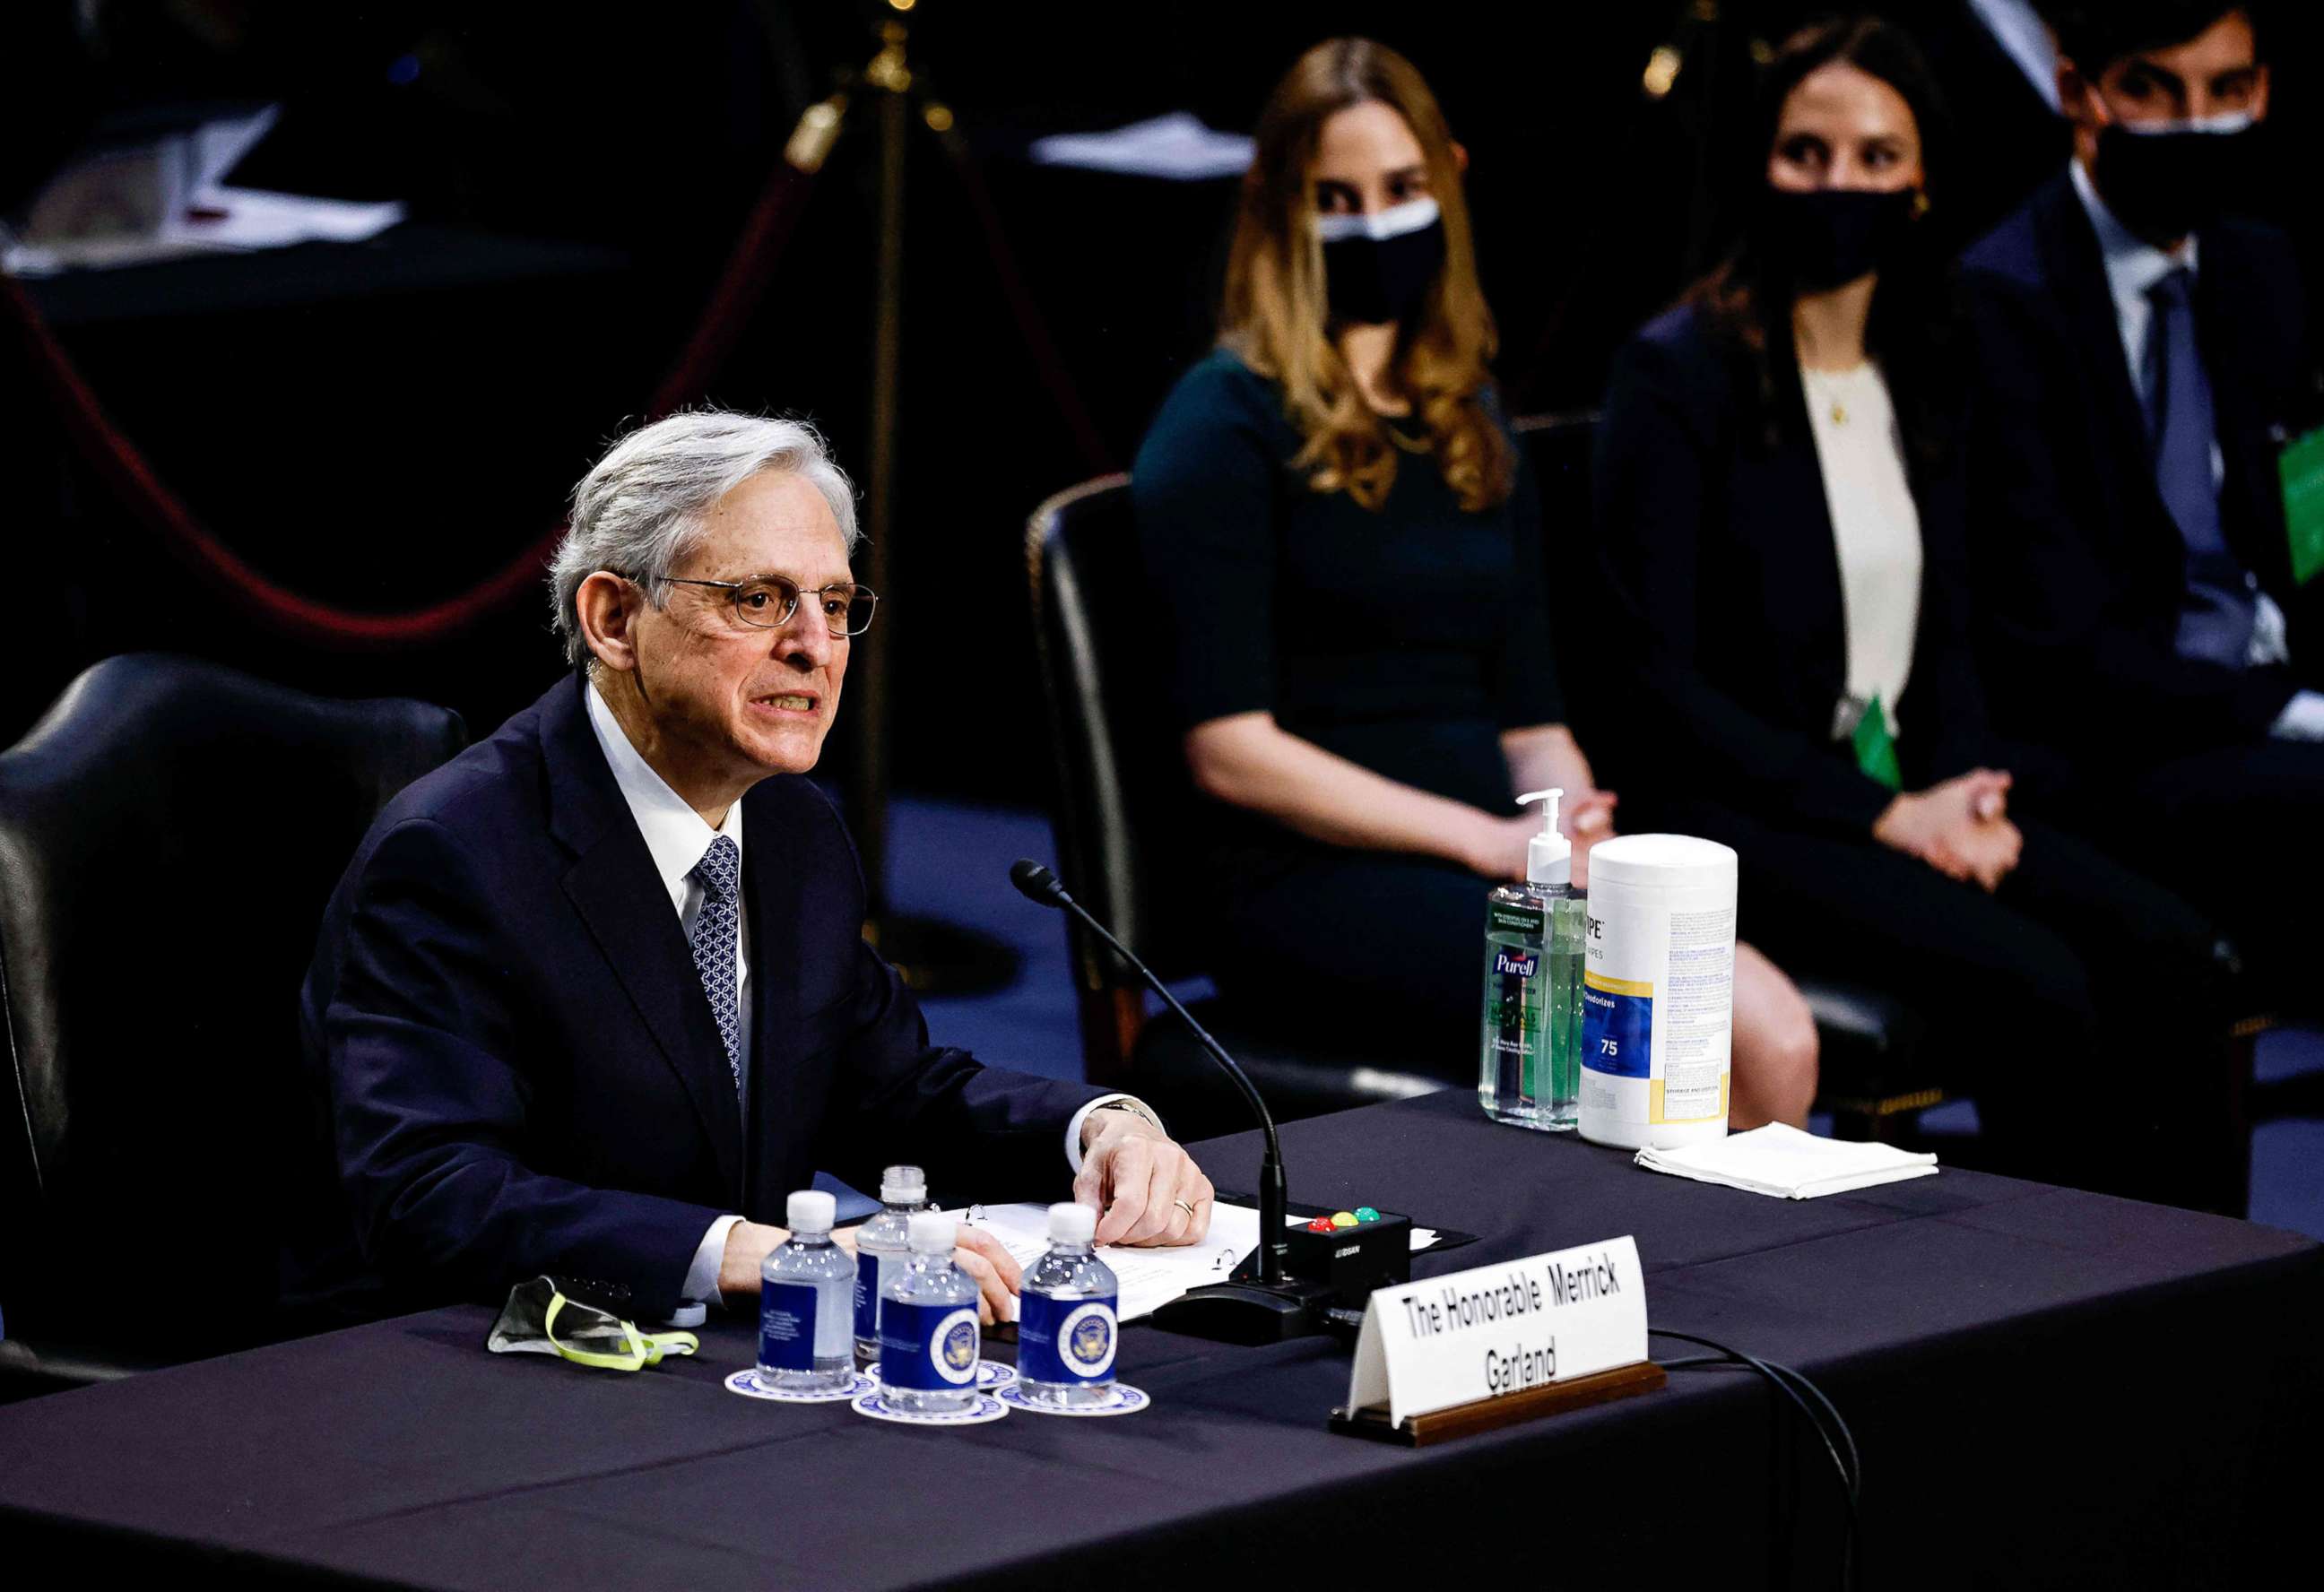 PHOTO: Judge Merrick Garland delivers a statement, as his family watches, before a Senate Judiciary Committee hearing on his nomination to be Attorney General on Capitol Hill in Washington, D.C., Feb. 22, 2021.